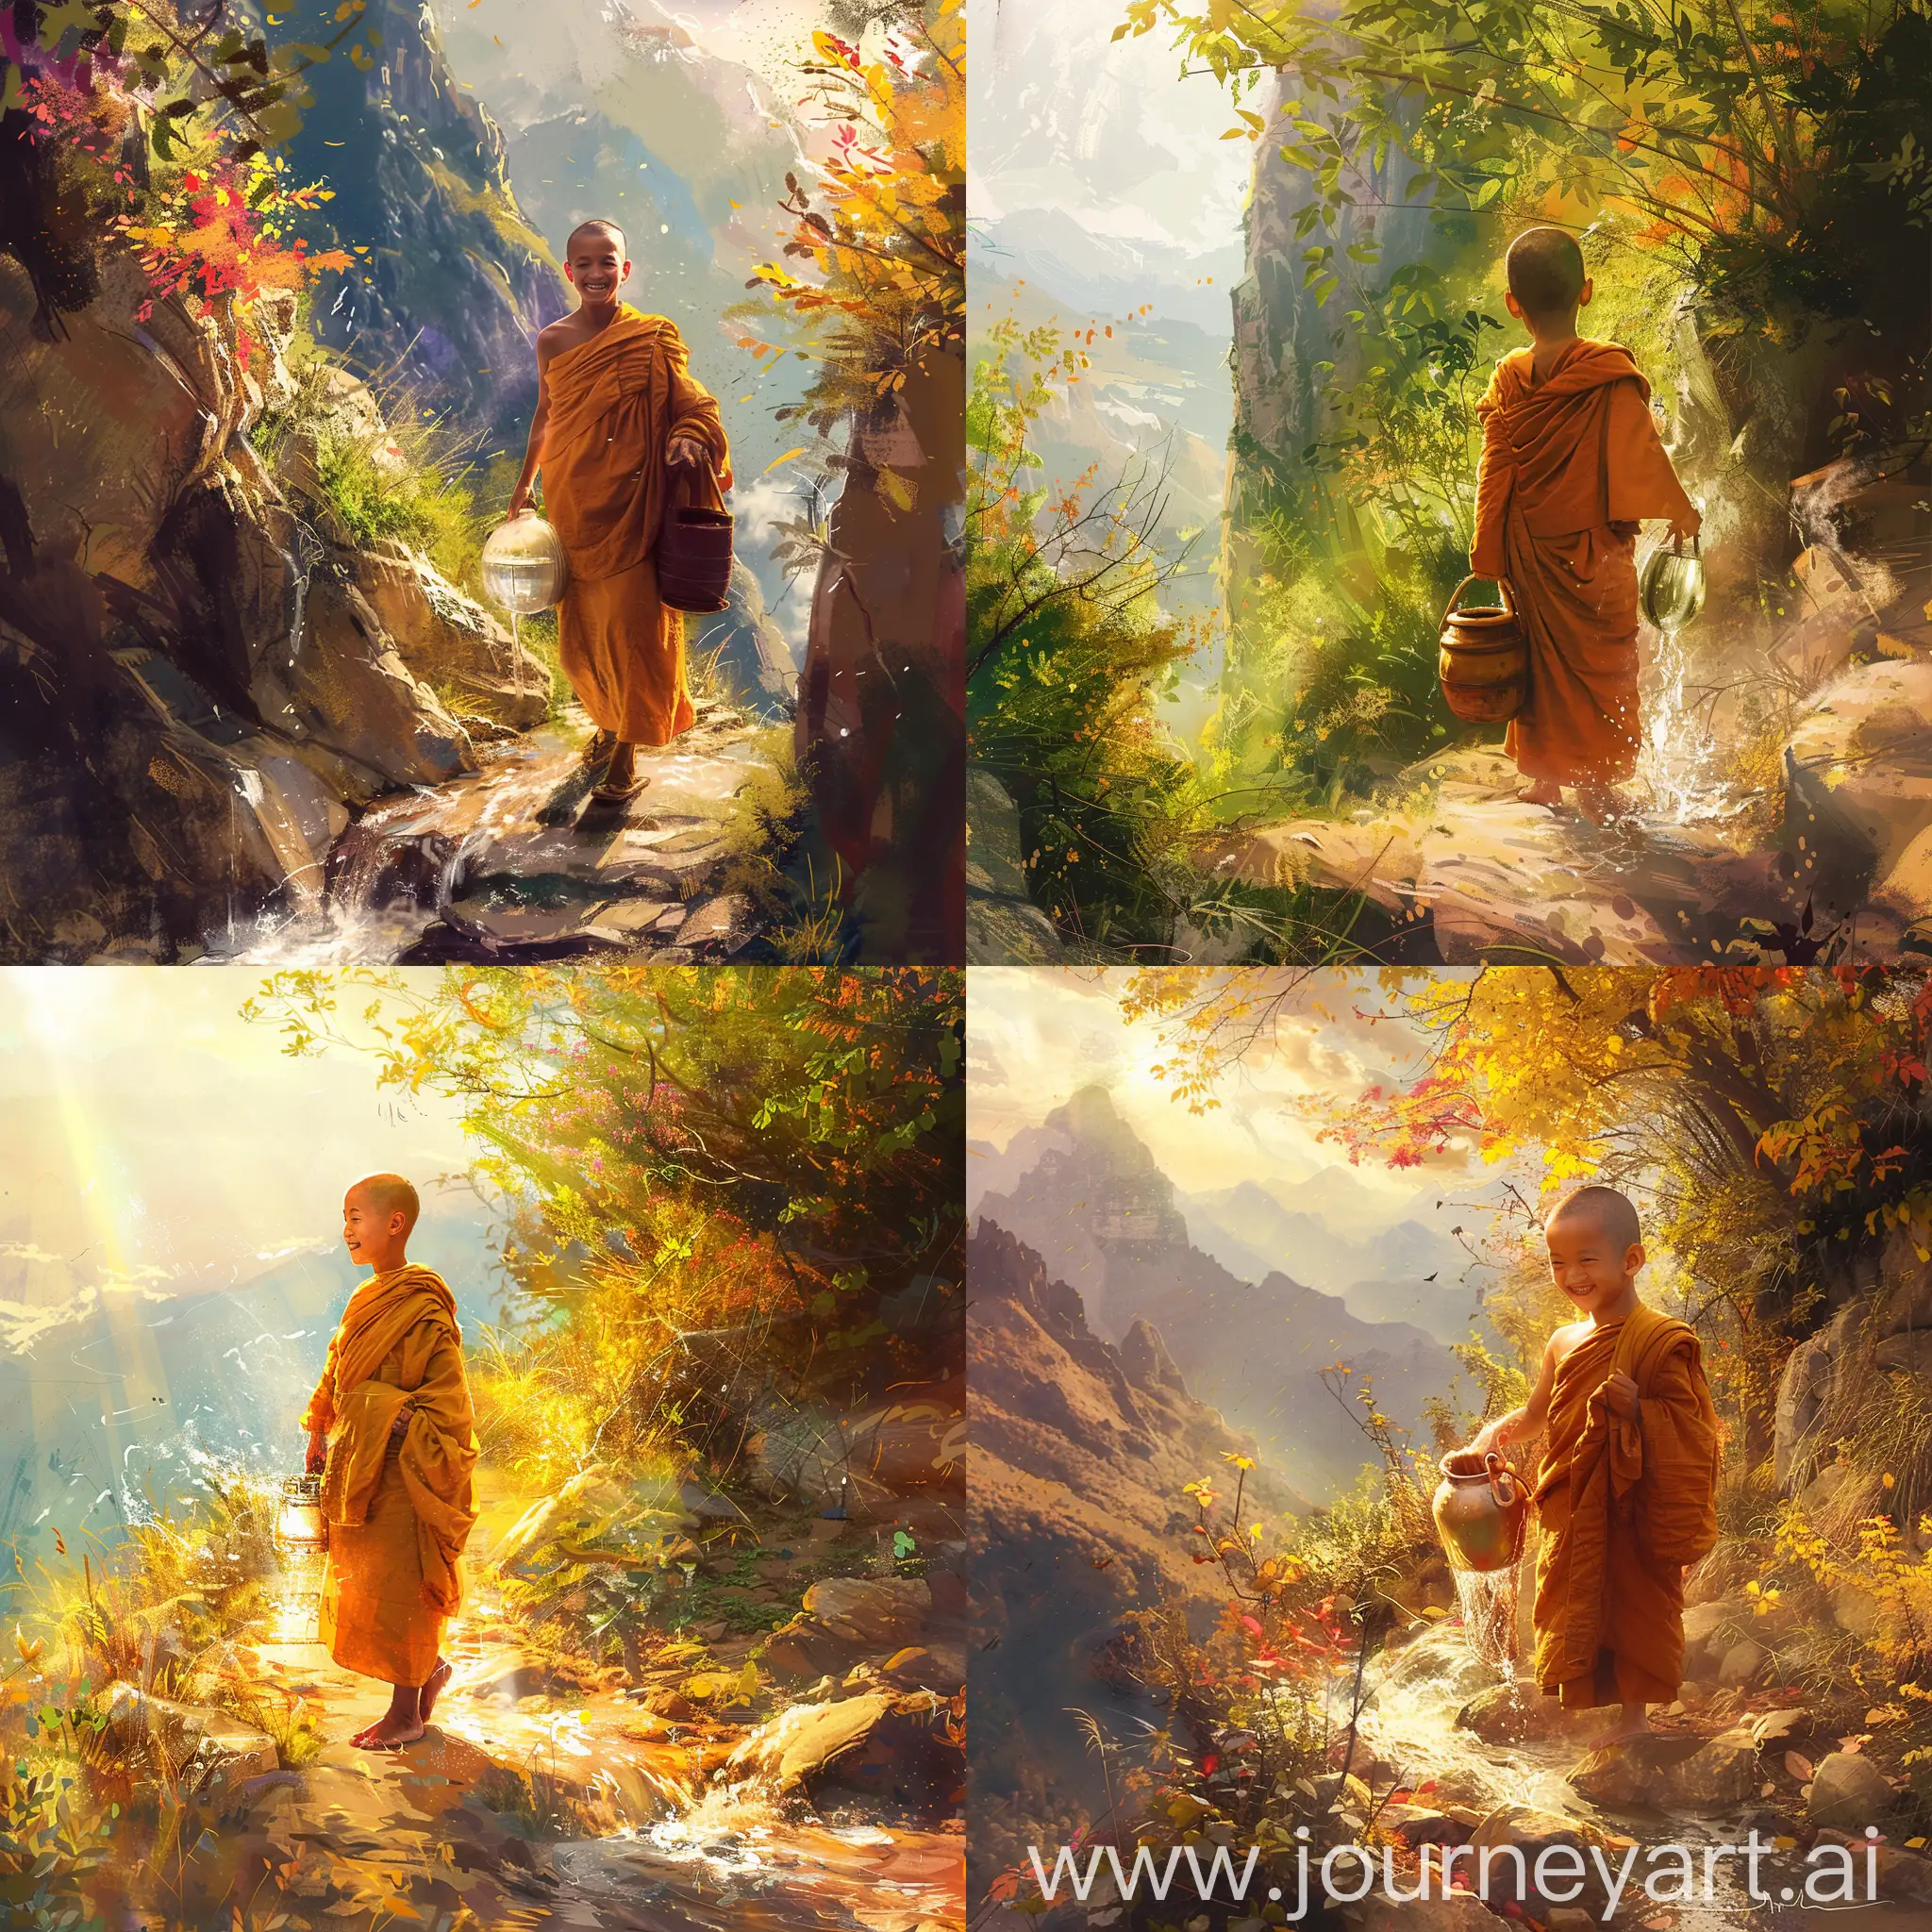 Happy-Monk-Carrying-Water-on-Mountain-Path-in-Serene-Environment